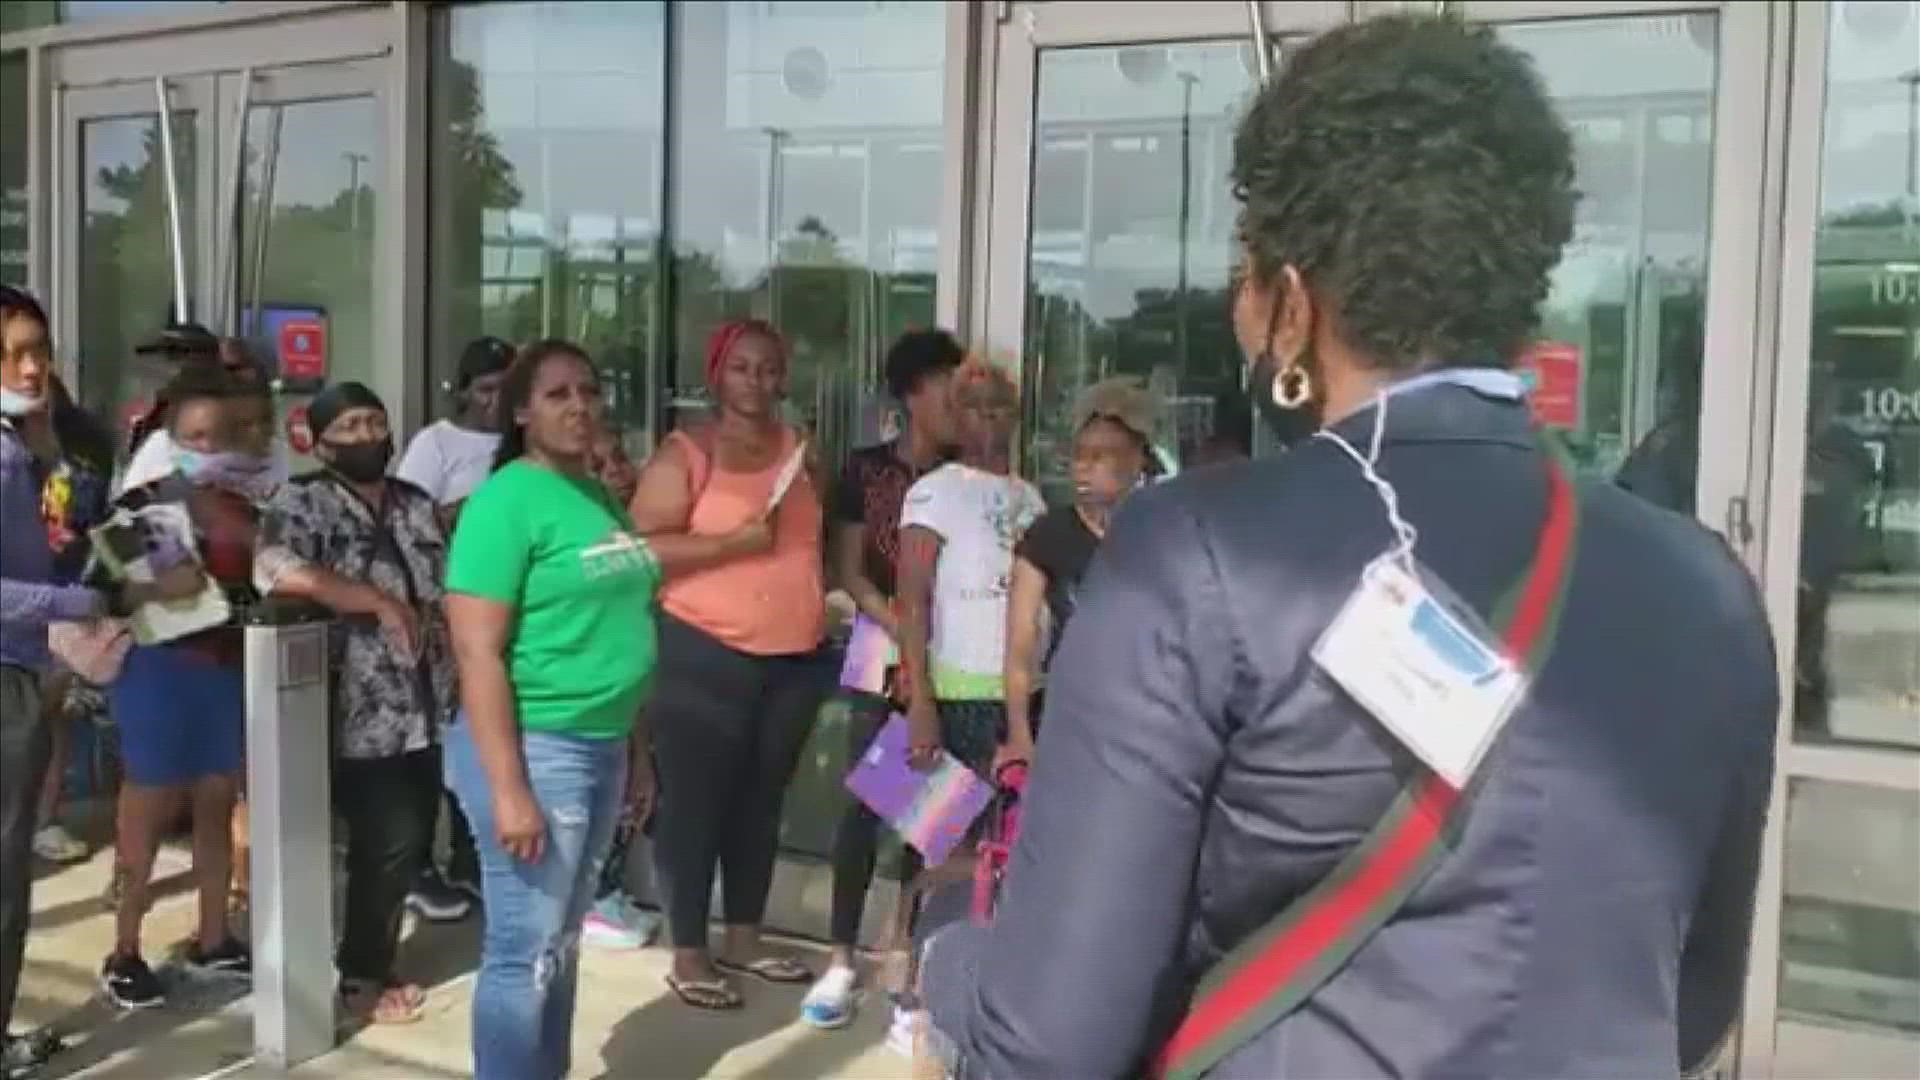 The Memphis Housing Authority hosted a housing fair Wednesday at the Central Library. It was only for people with housing vouchers, which led to confusion.